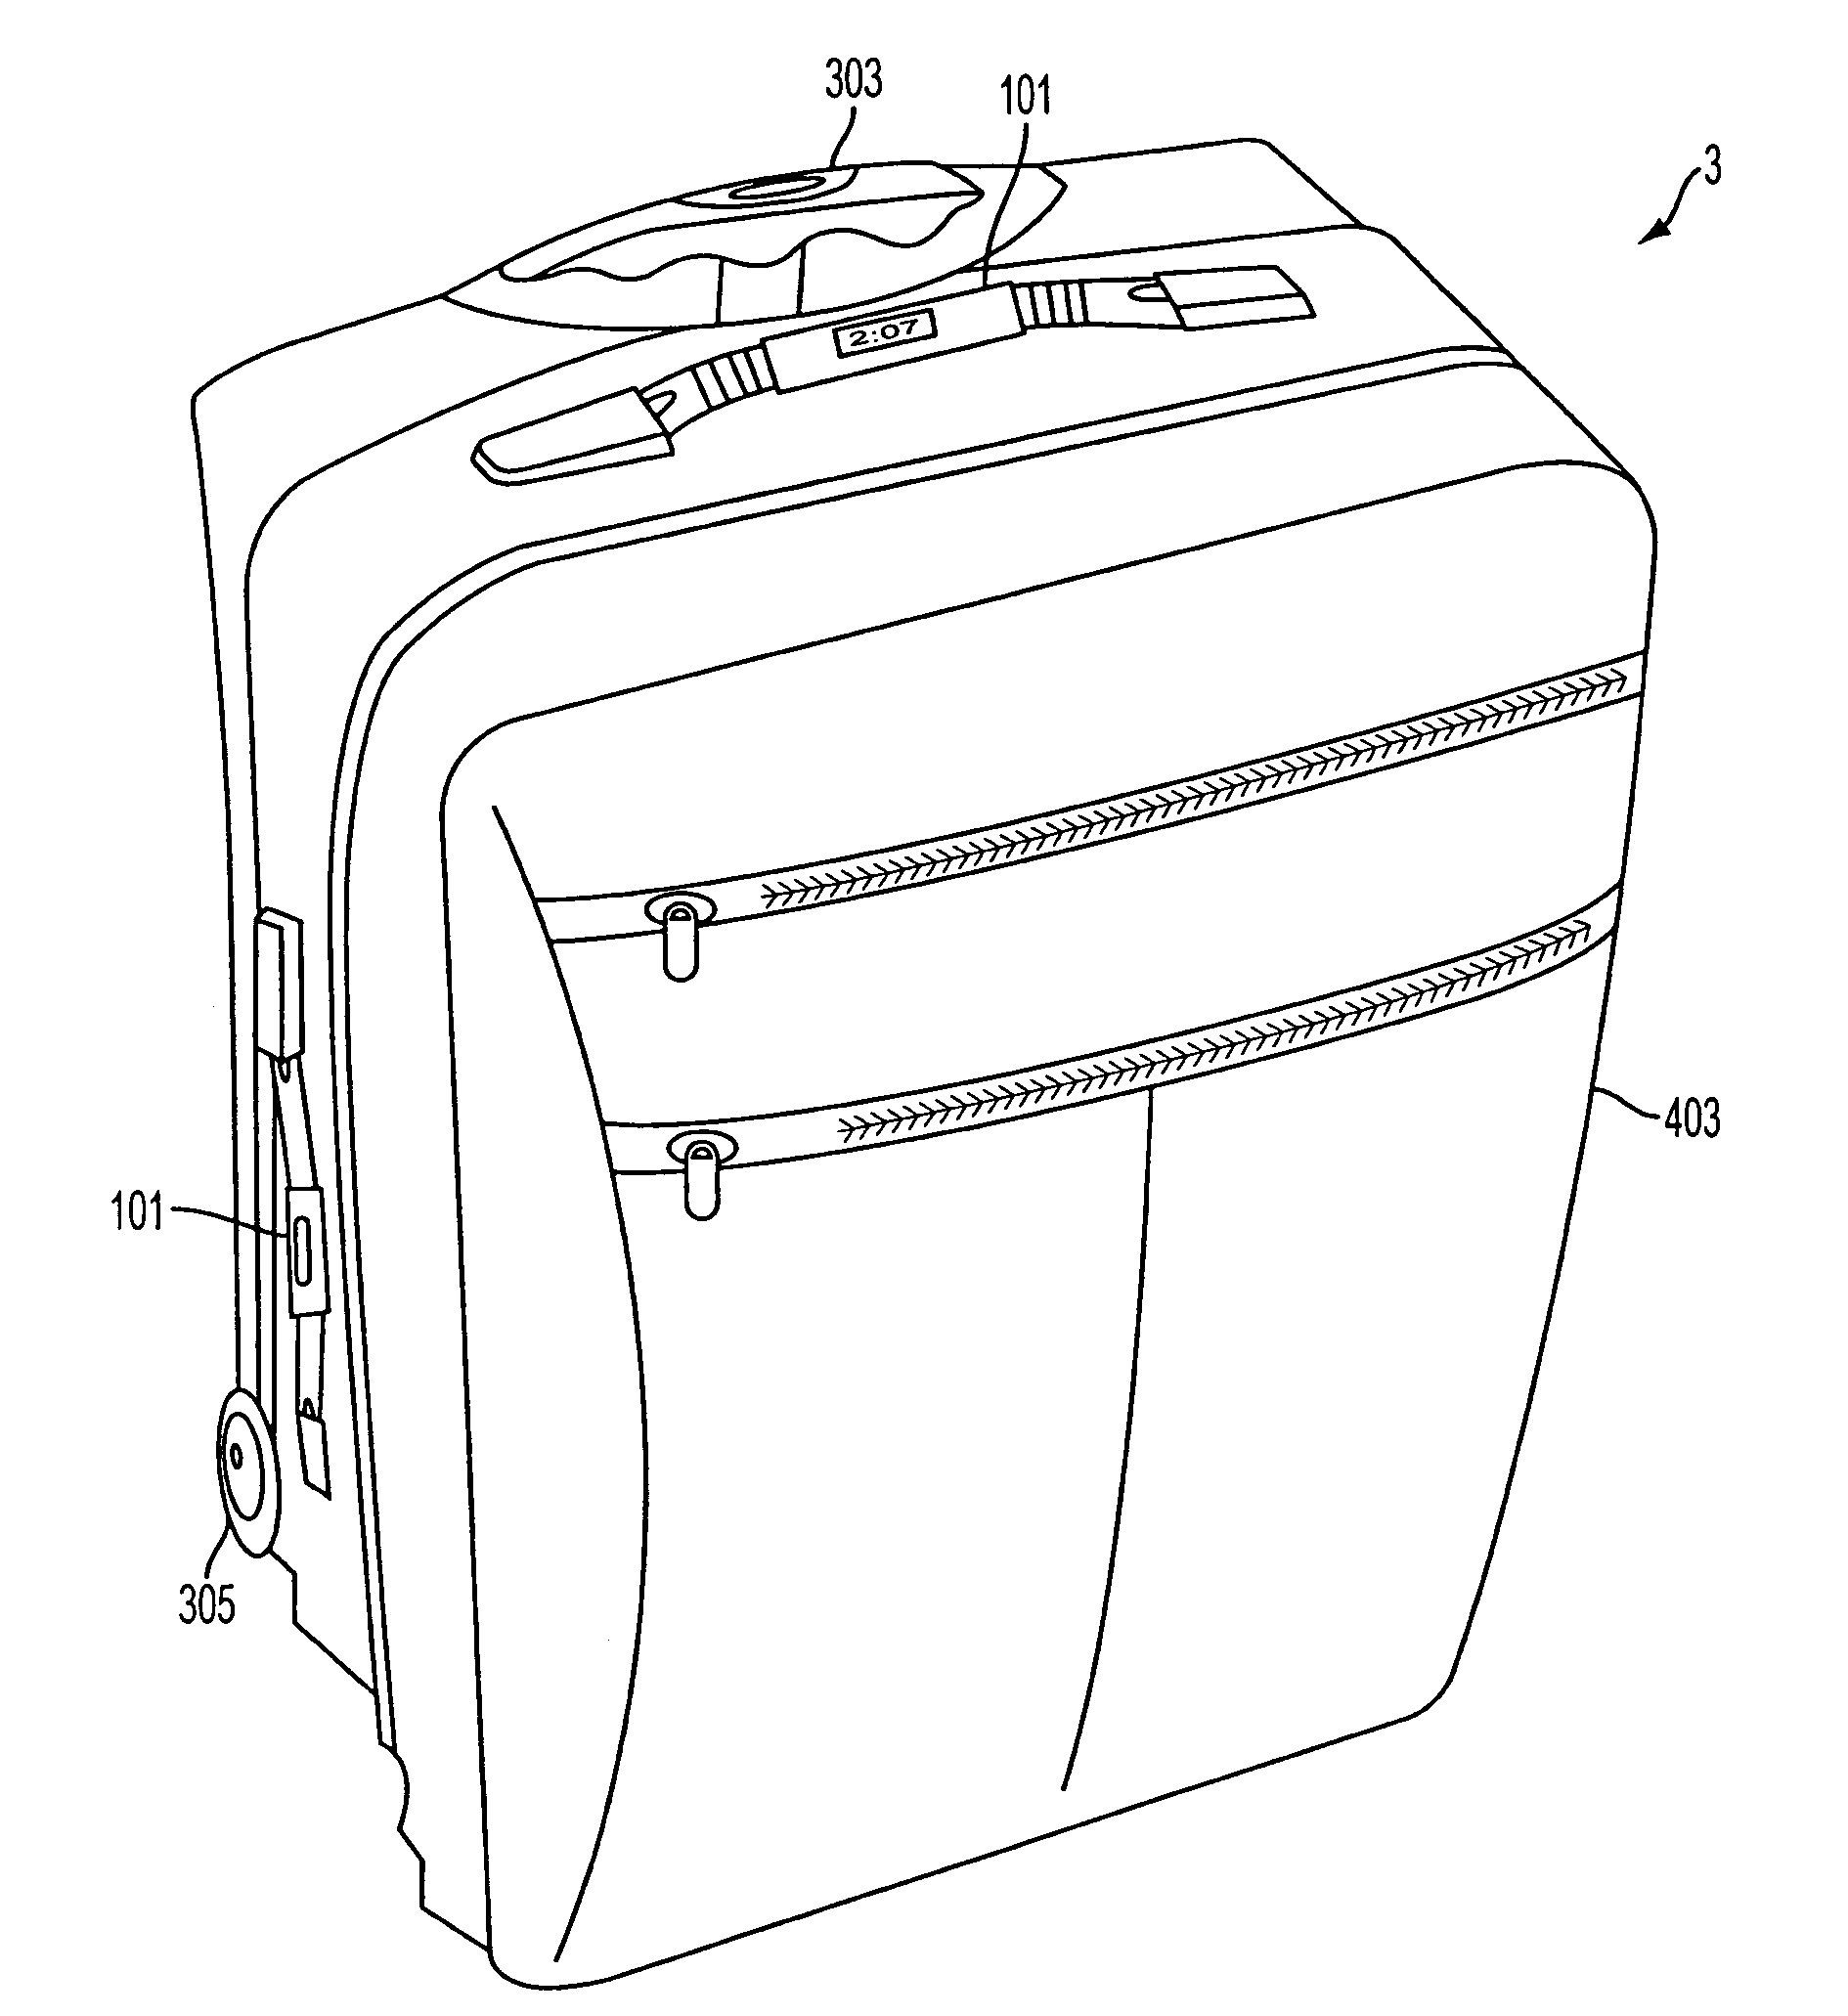 Weight determining mechanism for a backpack or other luggage